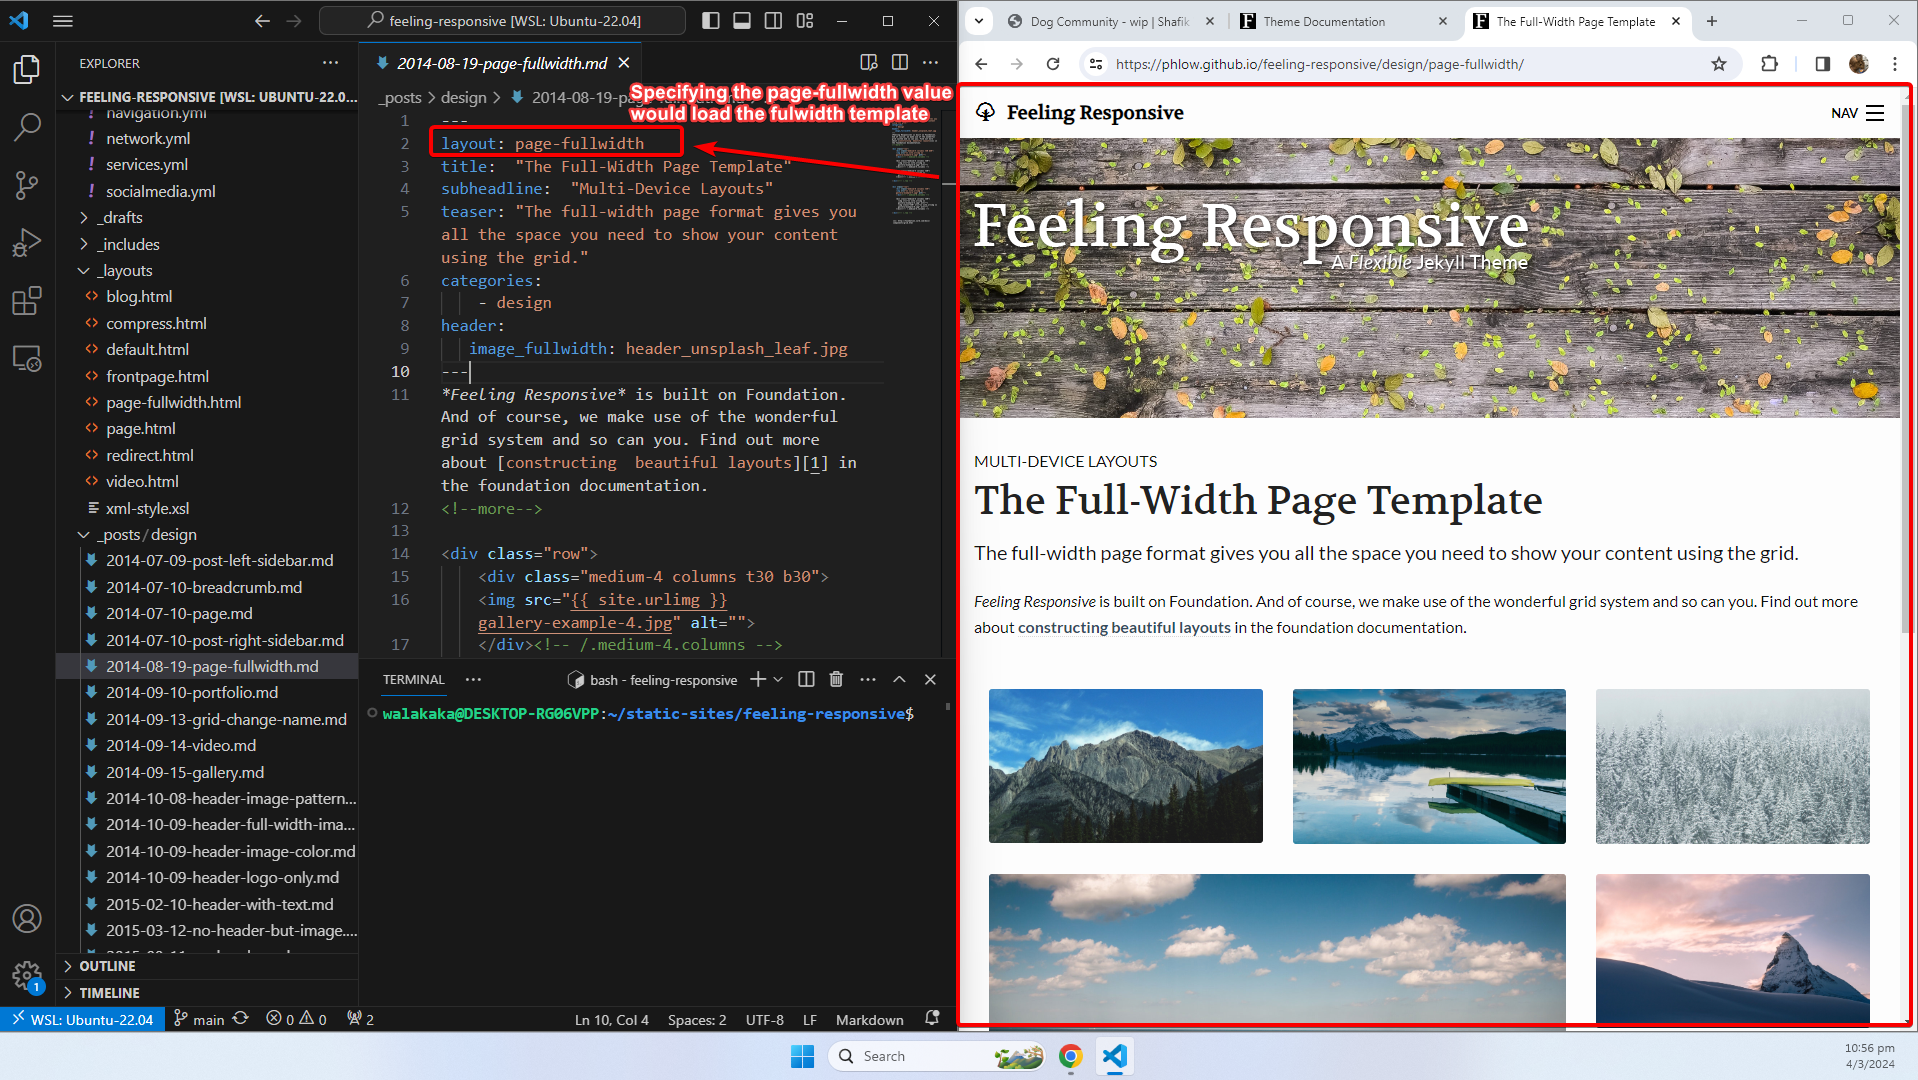 image showing the fullwidth page template